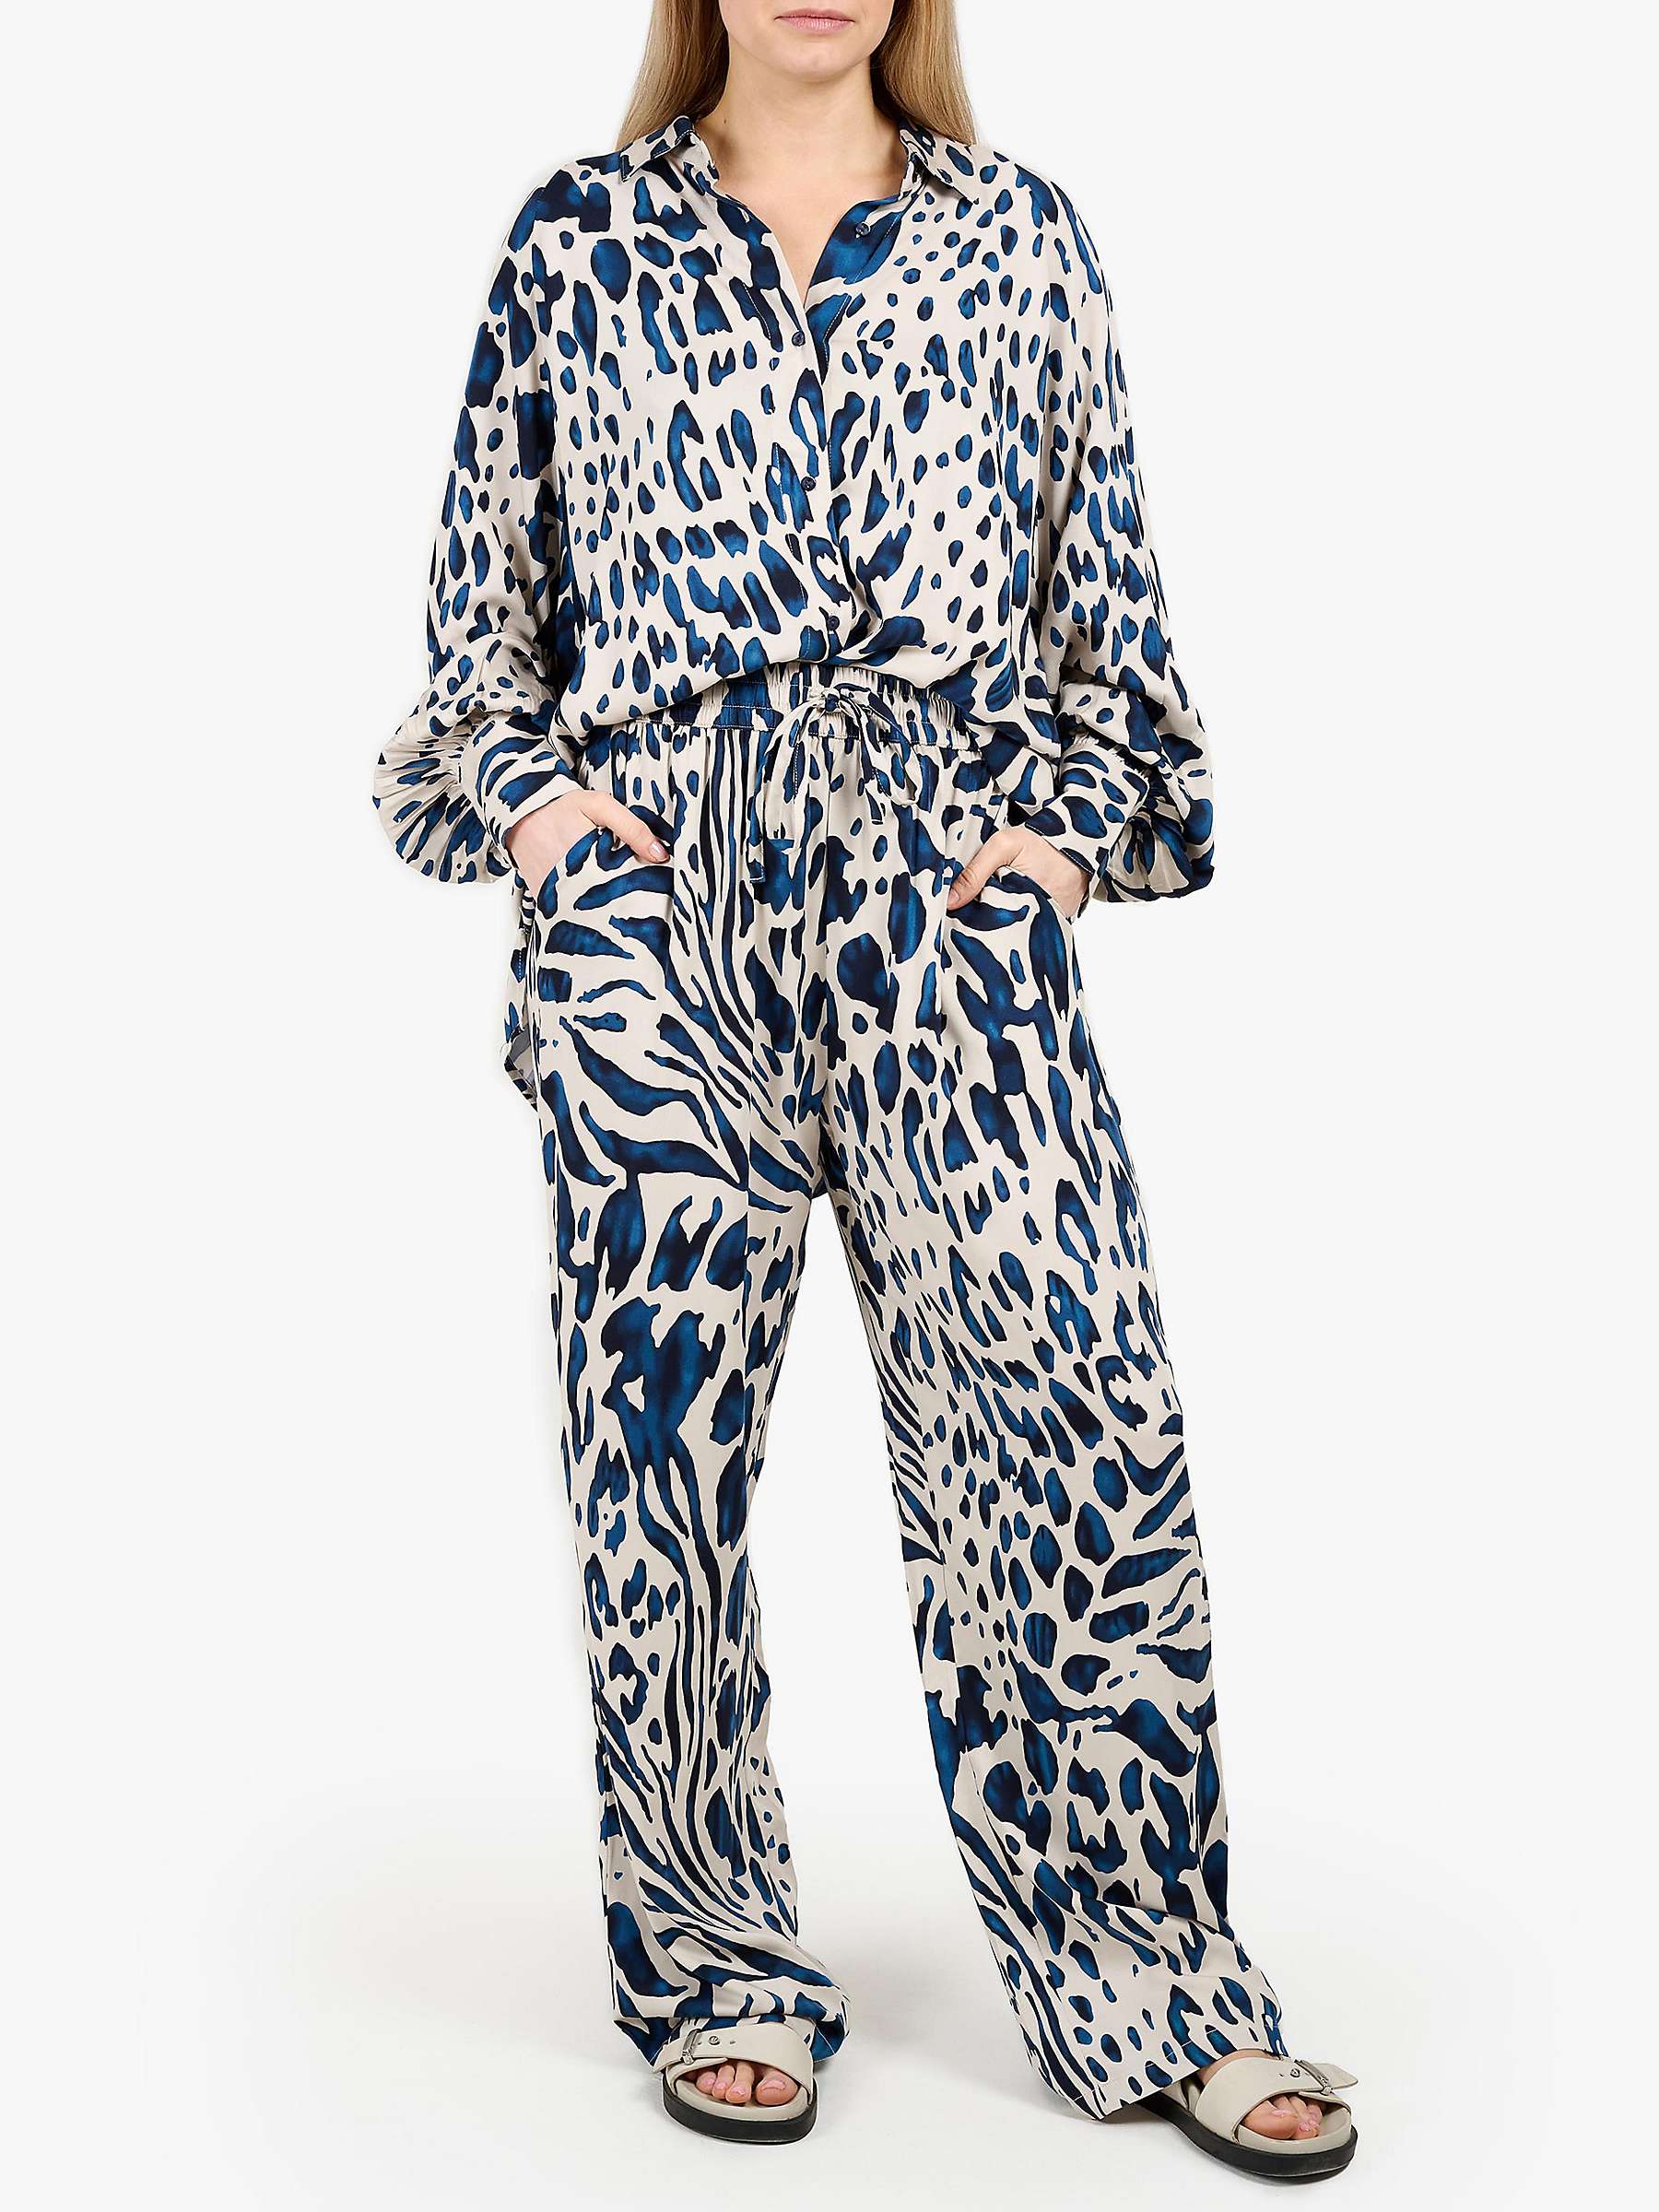 Buy Tutti & Co Praise Abstract Print Wide Leg Trousers, Blue/Multi Online at johnlewis.com